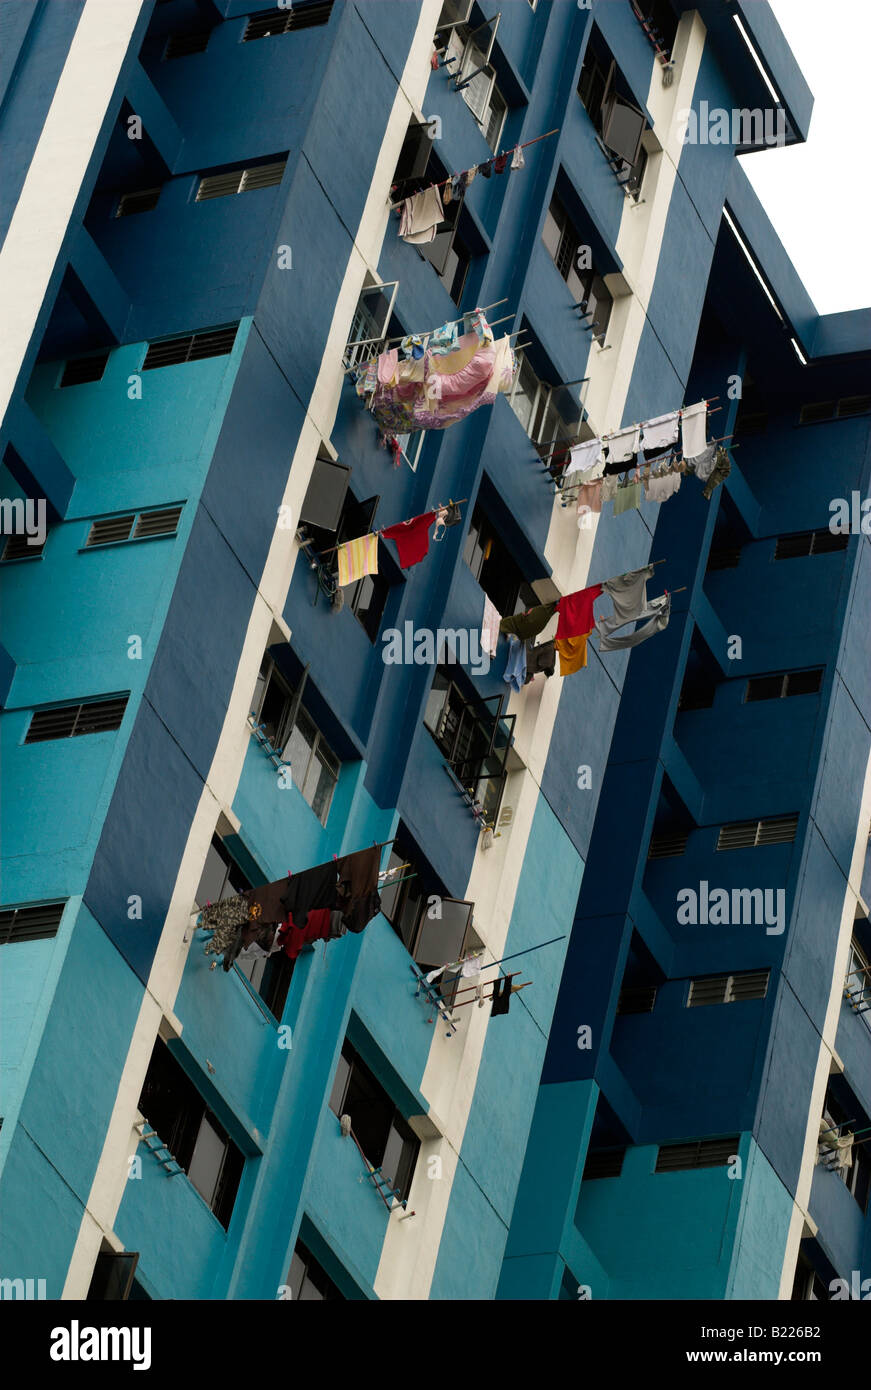 Laundry drying at a high rise apartment block, Singapore Stock Photo